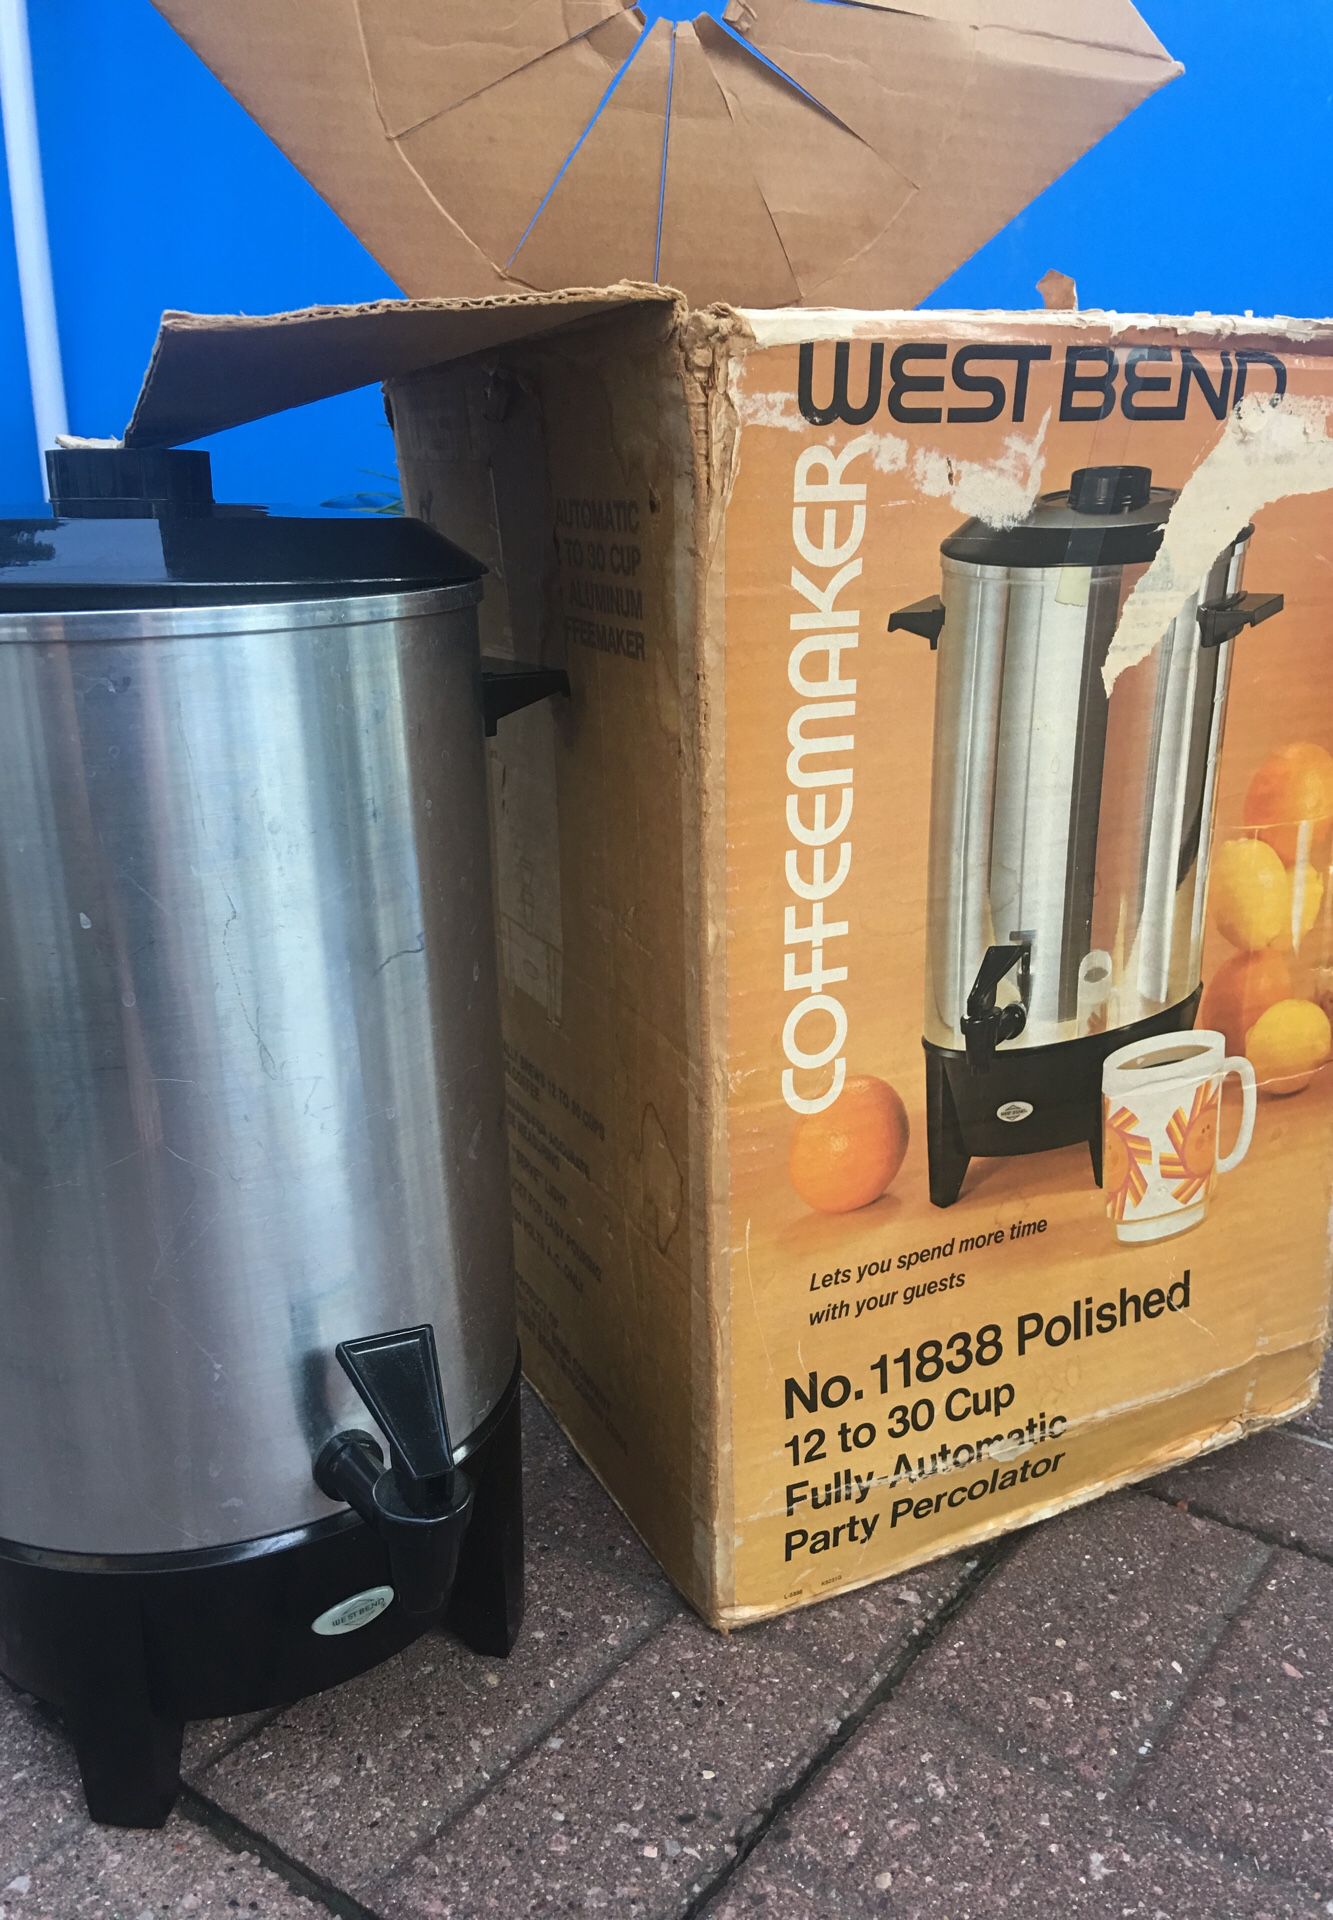 WEST BEND COFFEE MAKER 12-30 cup